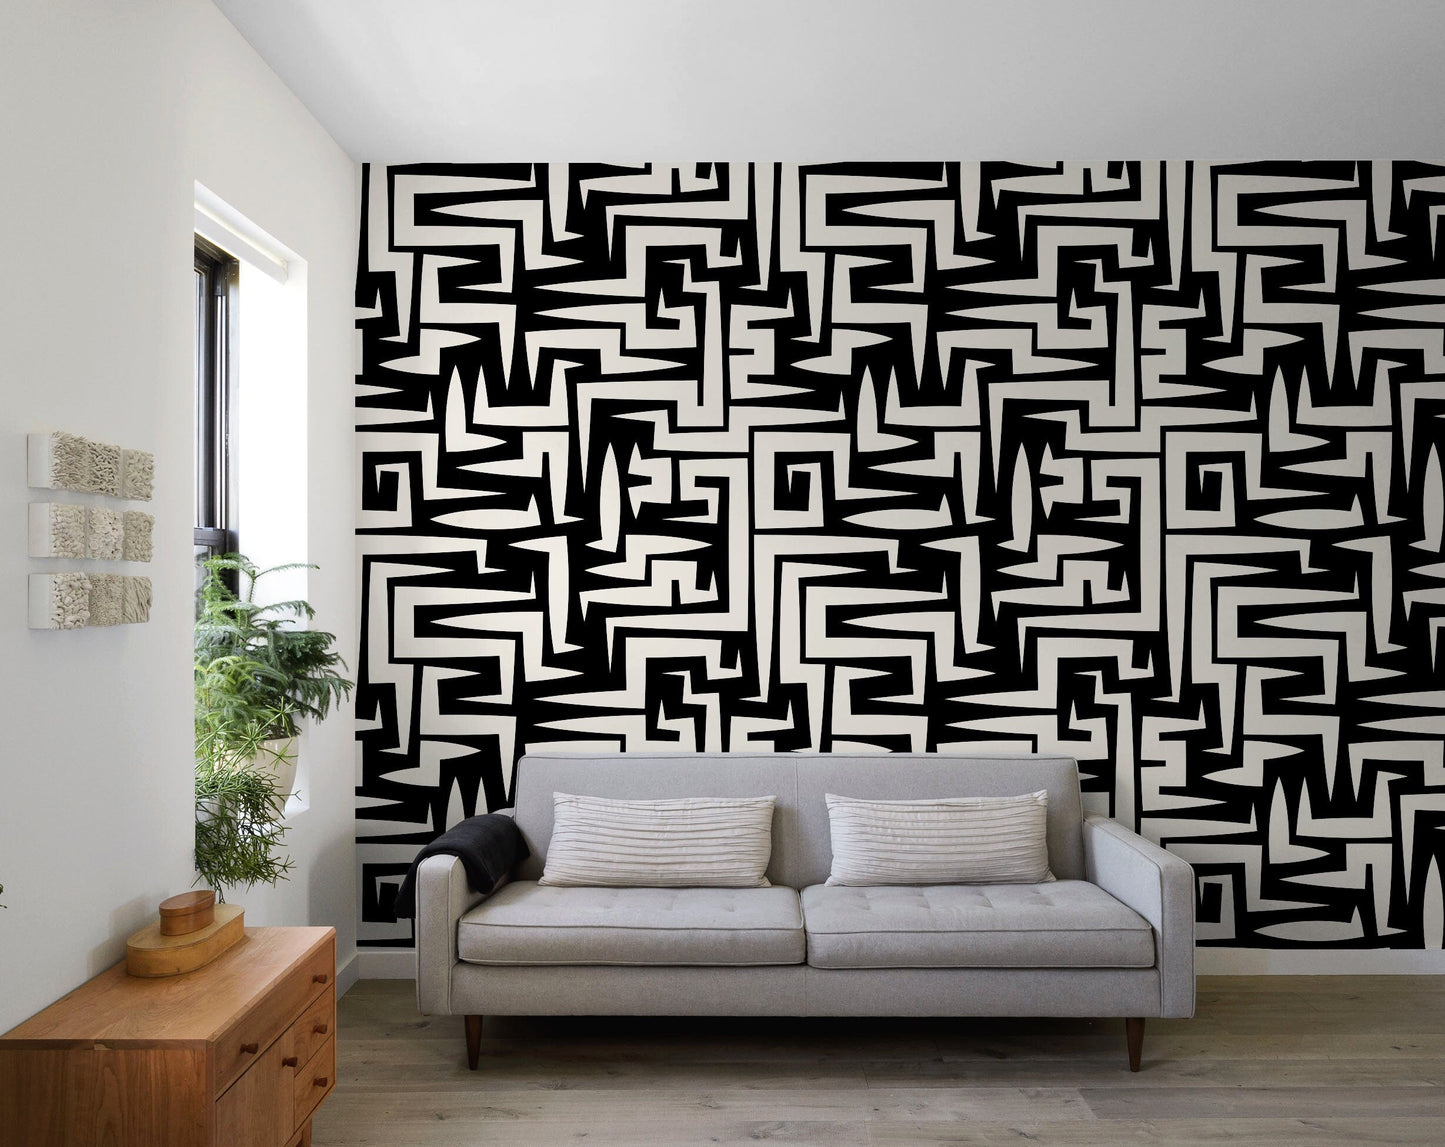 Wallpaper Peel and Stick Wallpaper Removable Wallpaper Home Decor Wall Art Wall Decor Room Decor / Abstract Geometric Wallpaper - C388